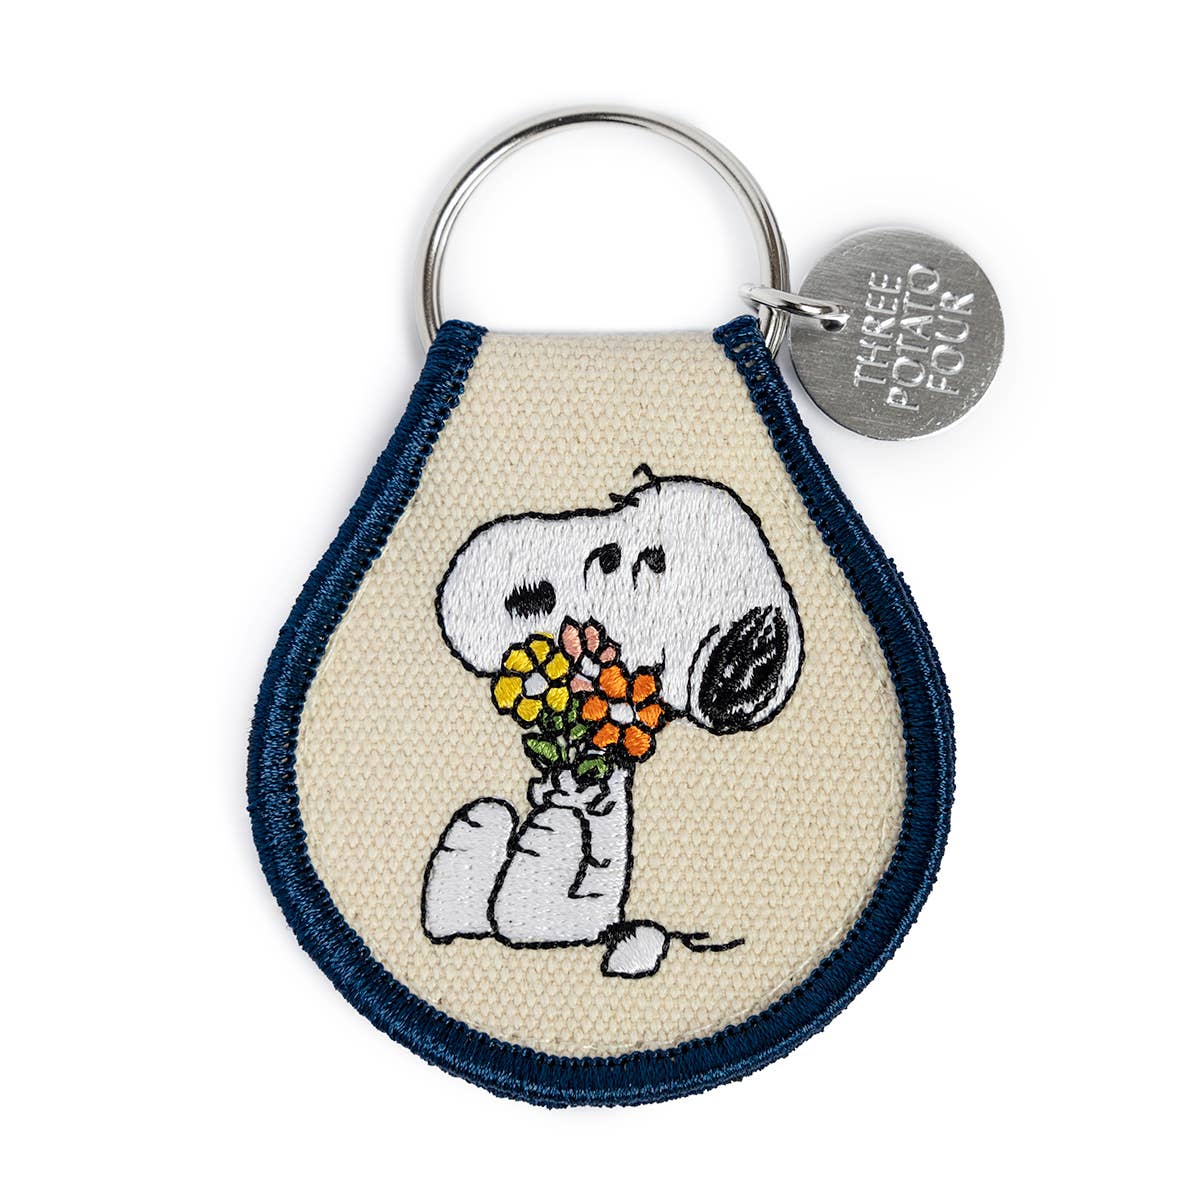 Three Potato Four presents the special edition 3P4 x Peanuts® Snoopy Flower Bouquet Patch Keychain.